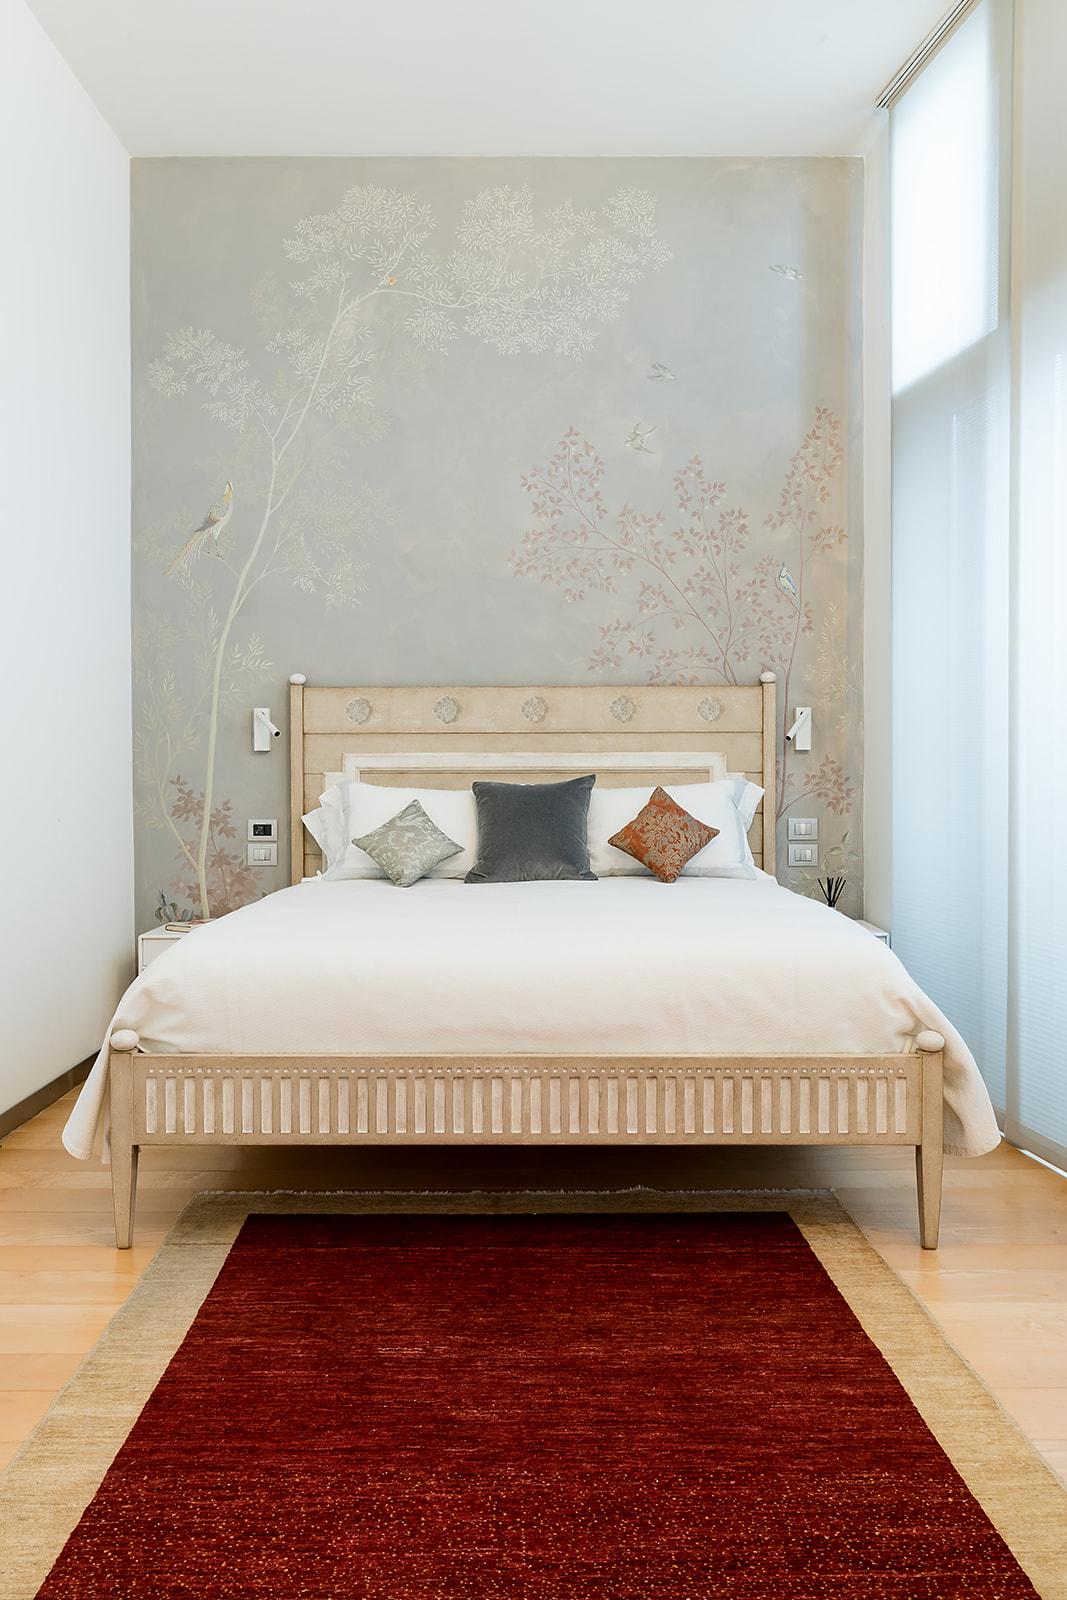 We are pleased to introduce you to our Veronese Bed. 
A beautiful simple-lined headboard, fully hand-painted down to the smallest detail. 
As per our traditions, the high headboard becomes a full canvas in the hands of our artists. 
In this case, we